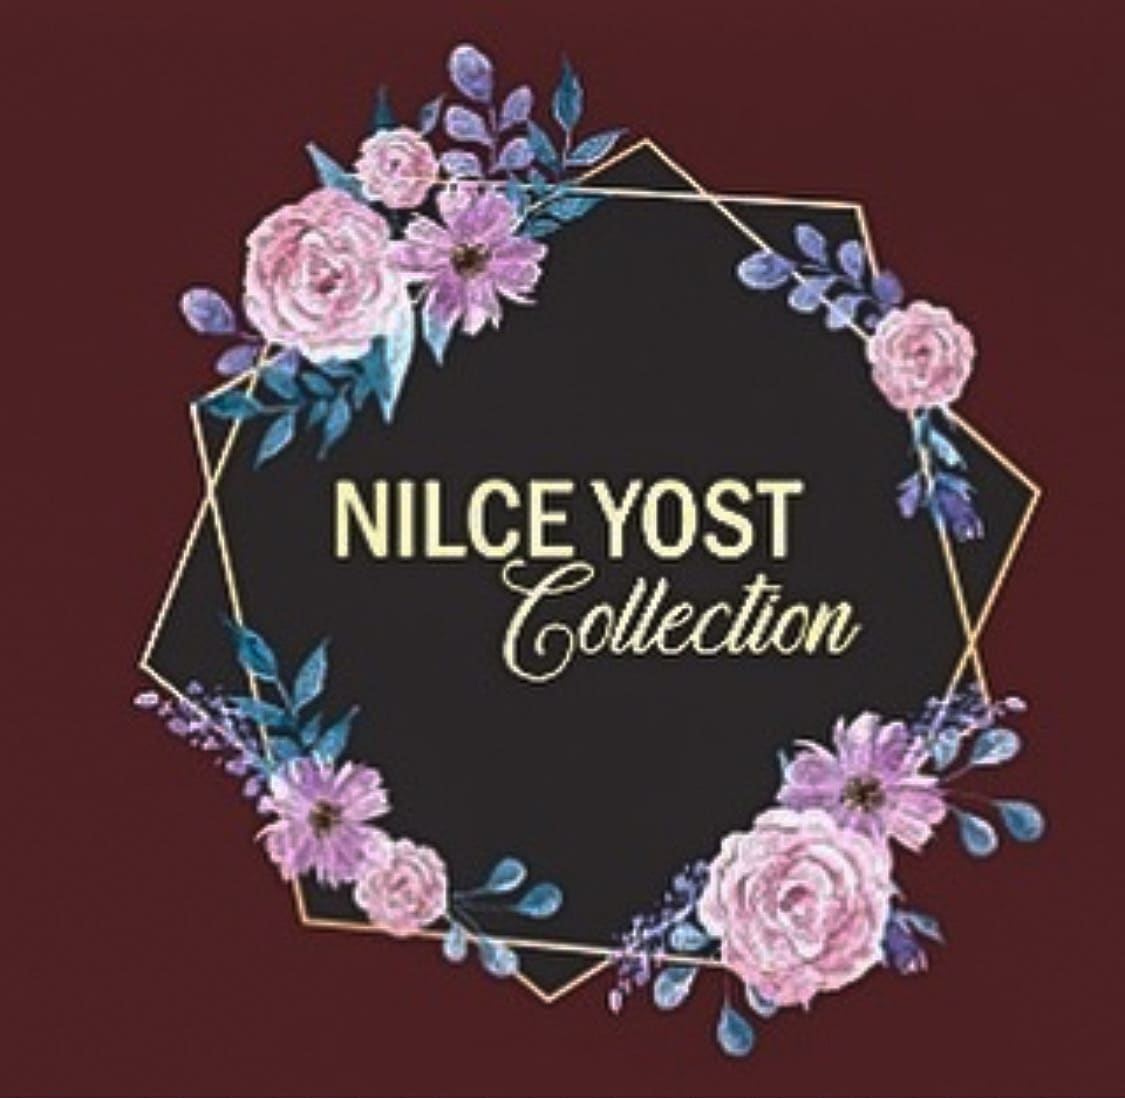 Nilce Yost Collection